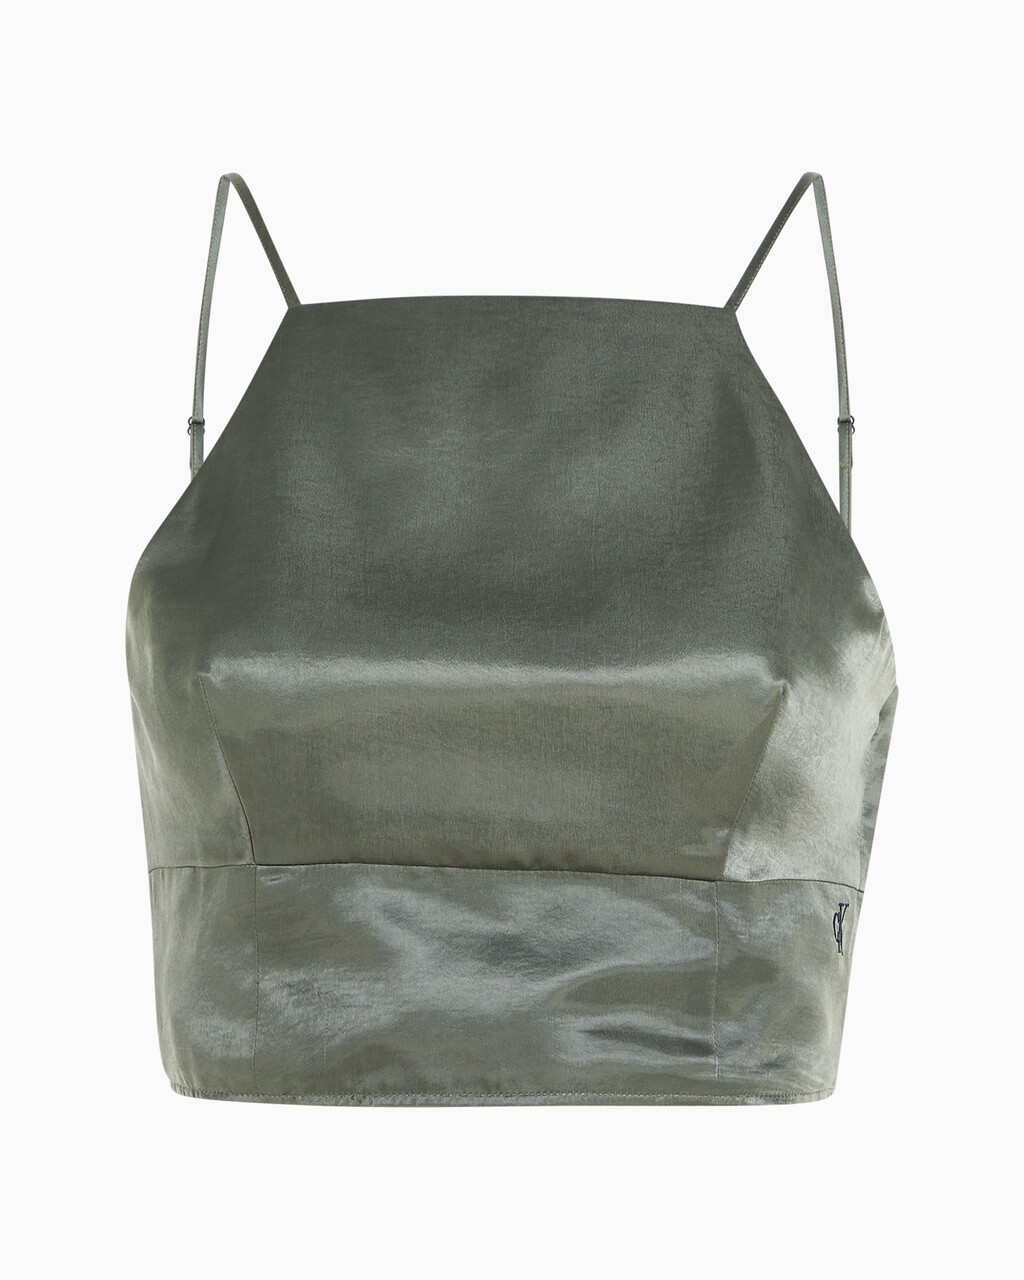 Strappy Satin Tank Top, Dusty Olive, hi-res